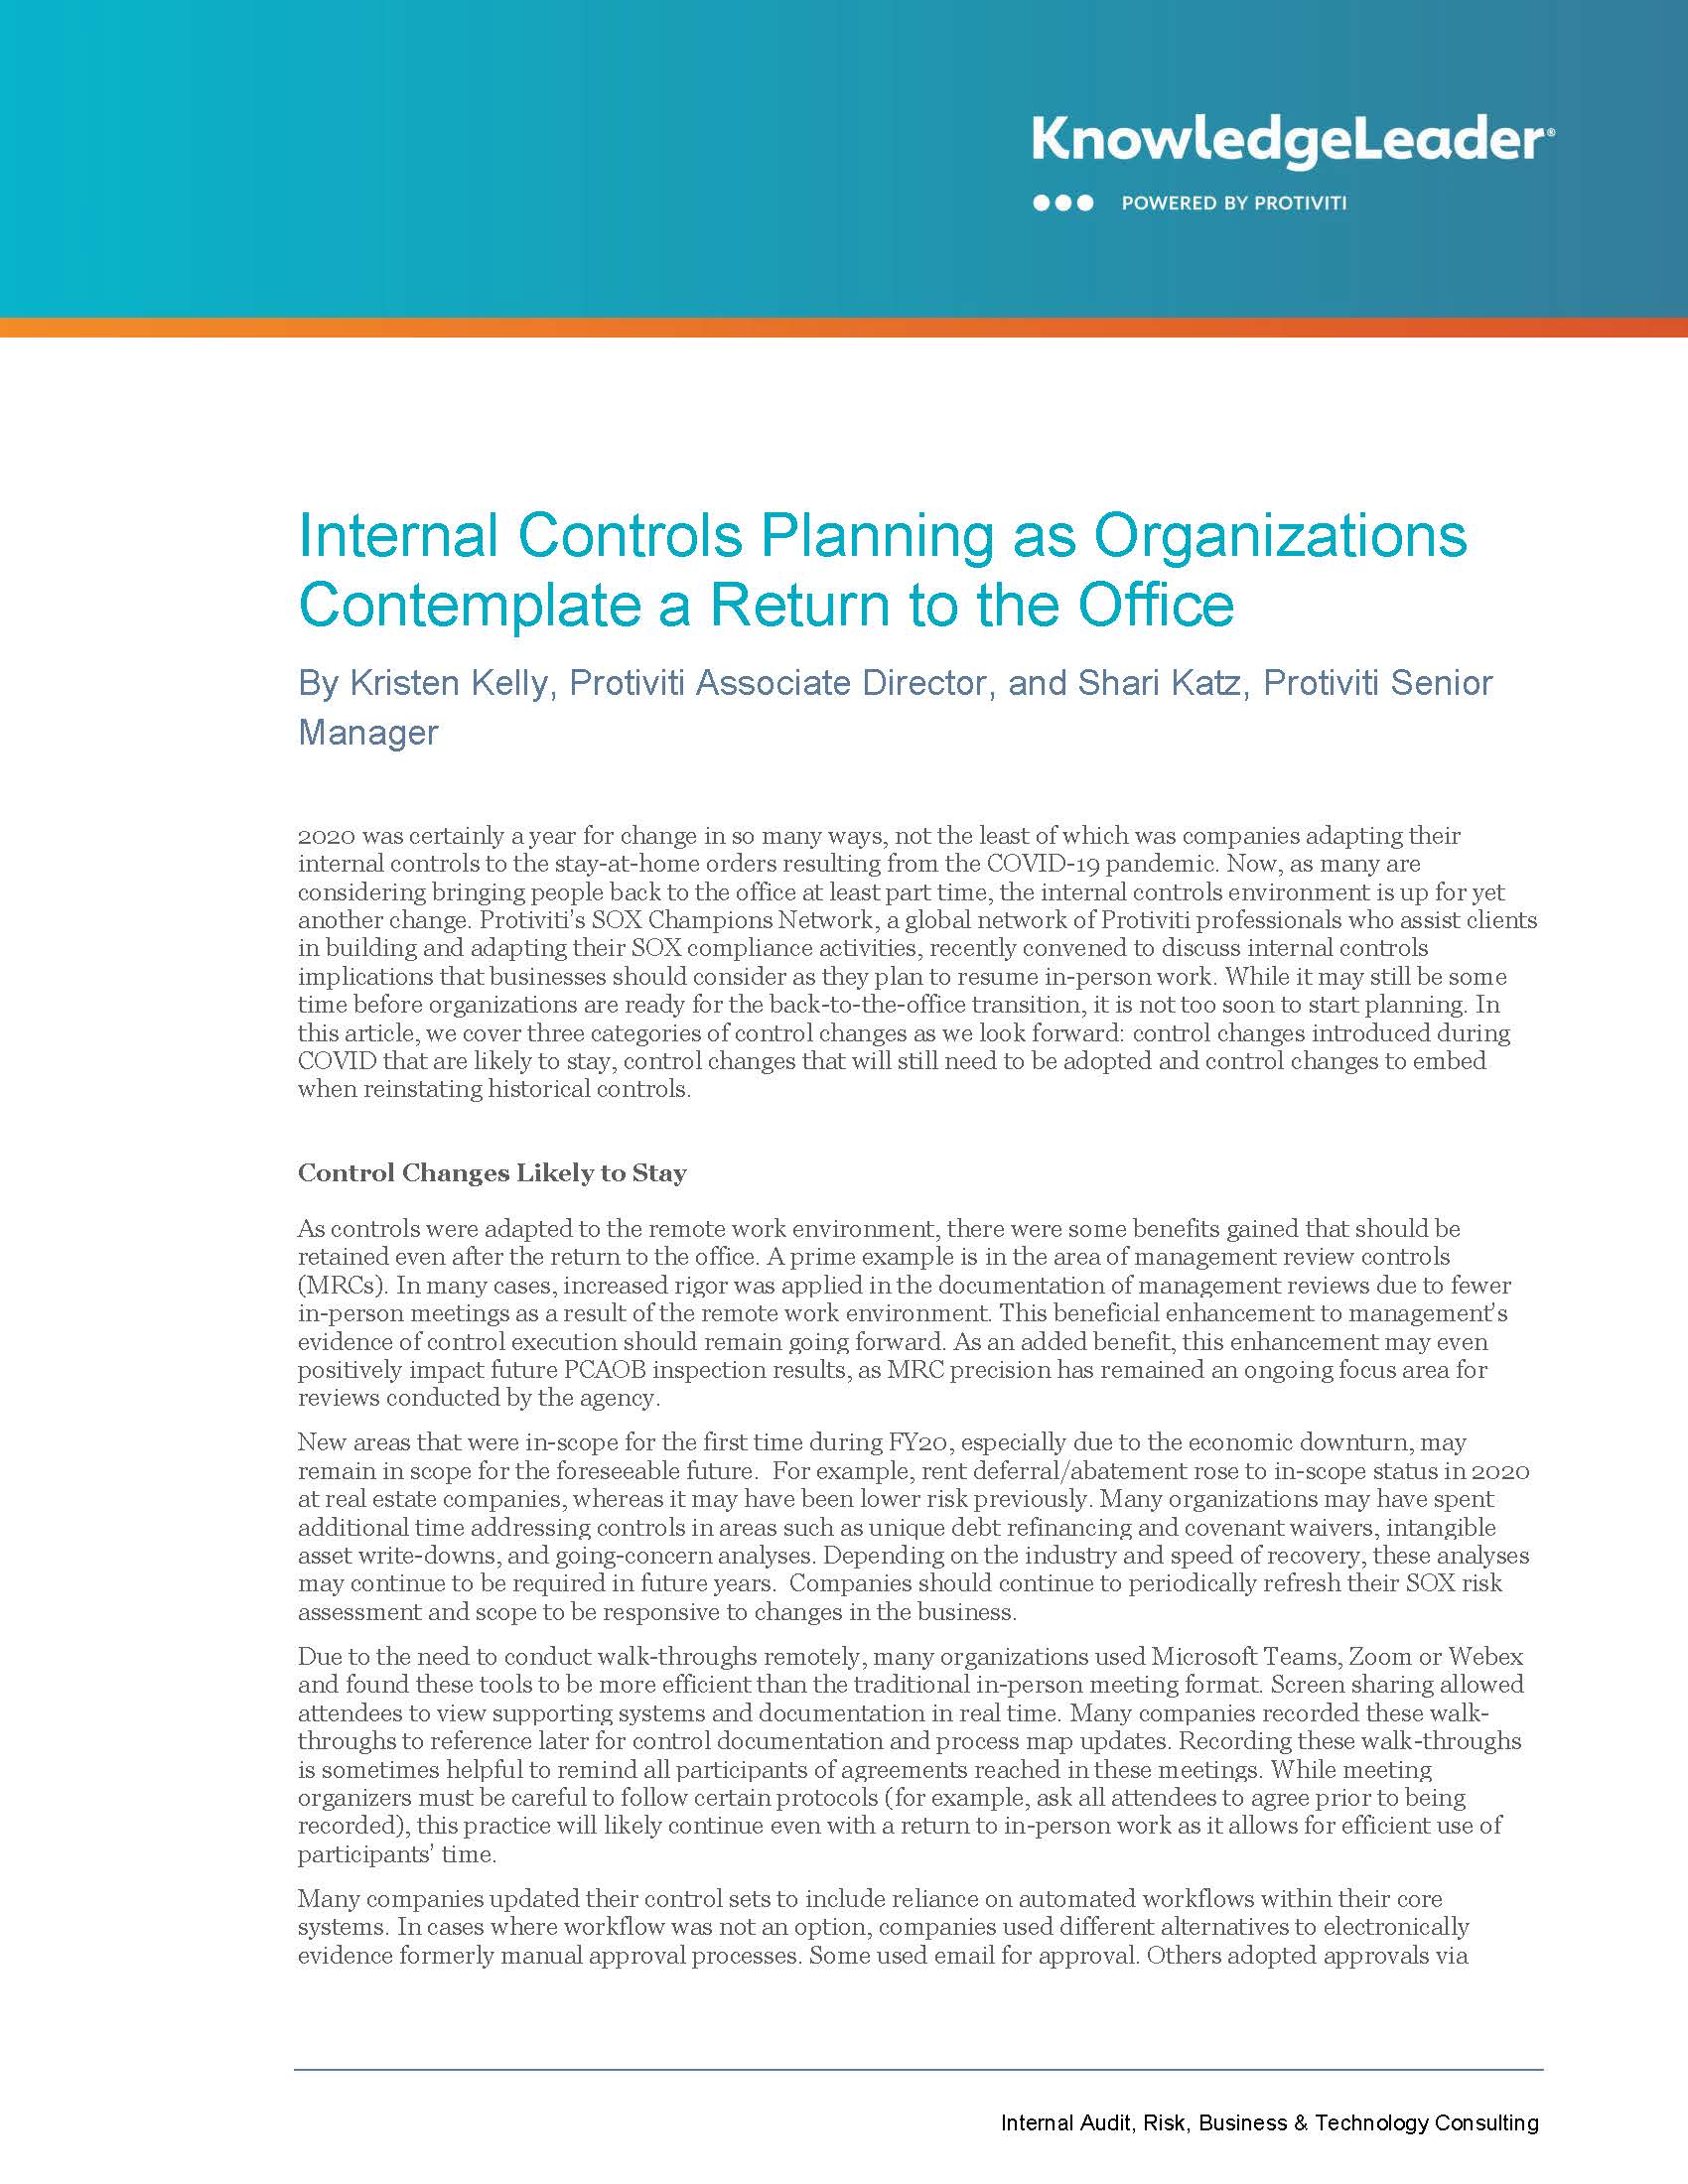 Screenshot of the first page of Internal Controls Planning as Organizations Contemplate a Return to the Office